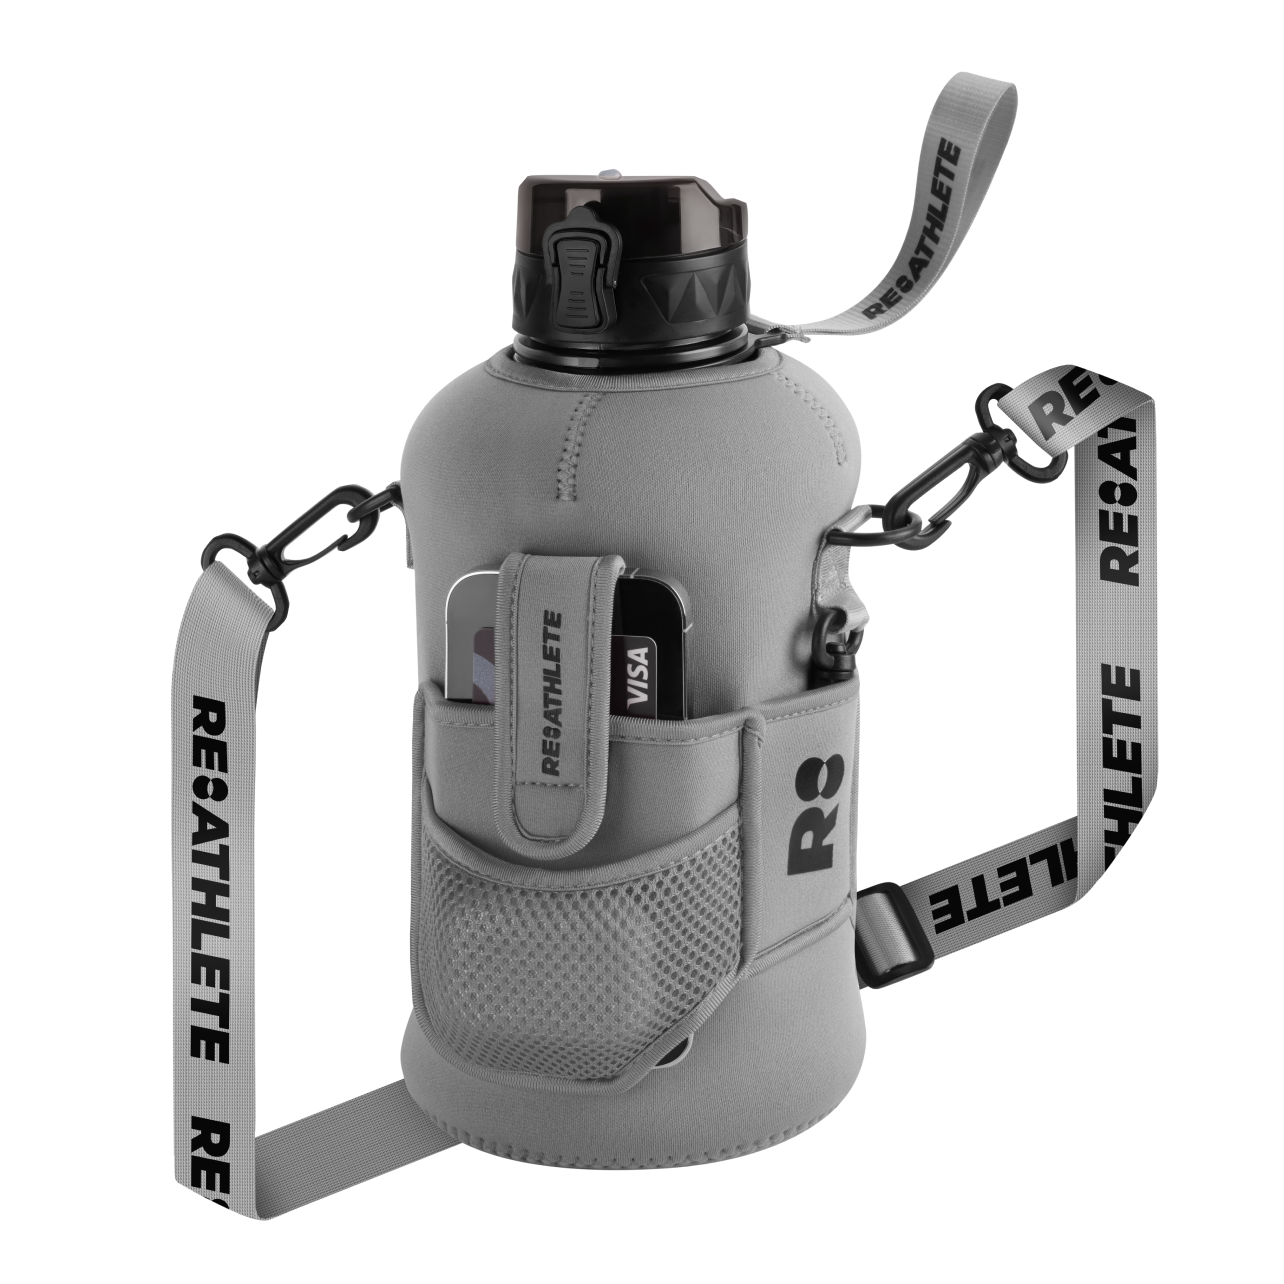 DRINQ Half-Gallon Water Bottle (ONE-TIME OFFER)